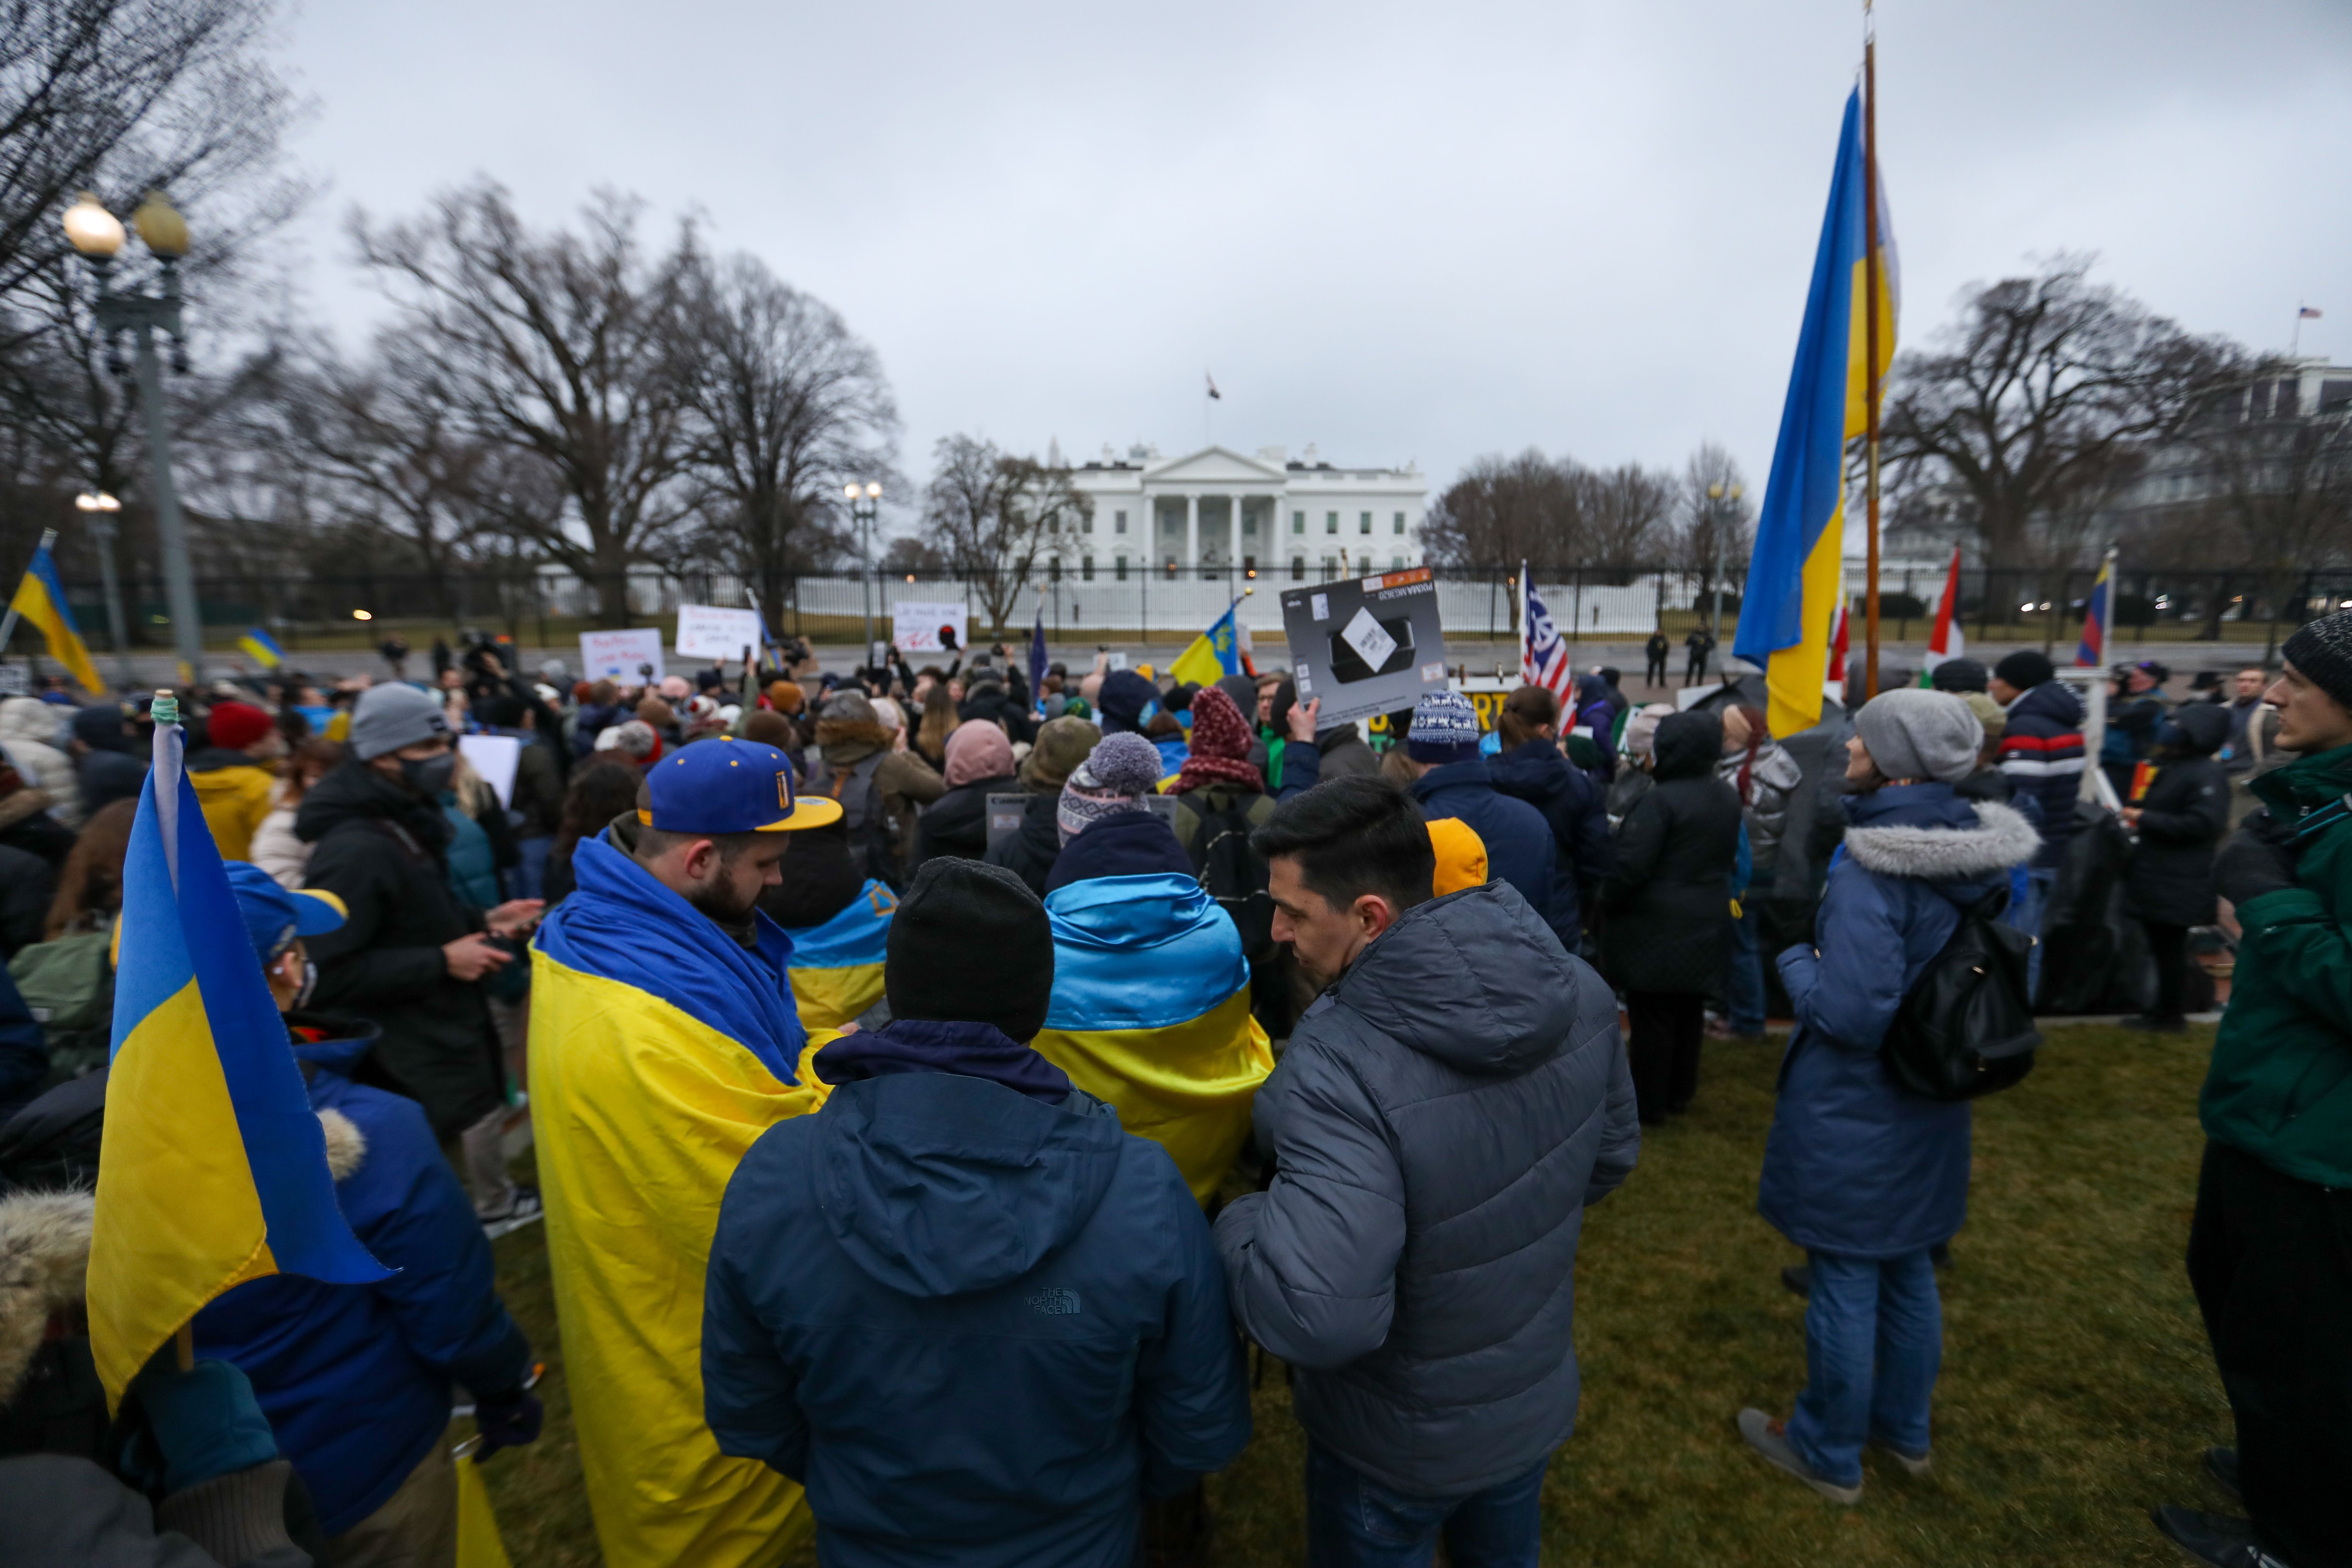 Ukrainians gather in front of the White House on February 24.